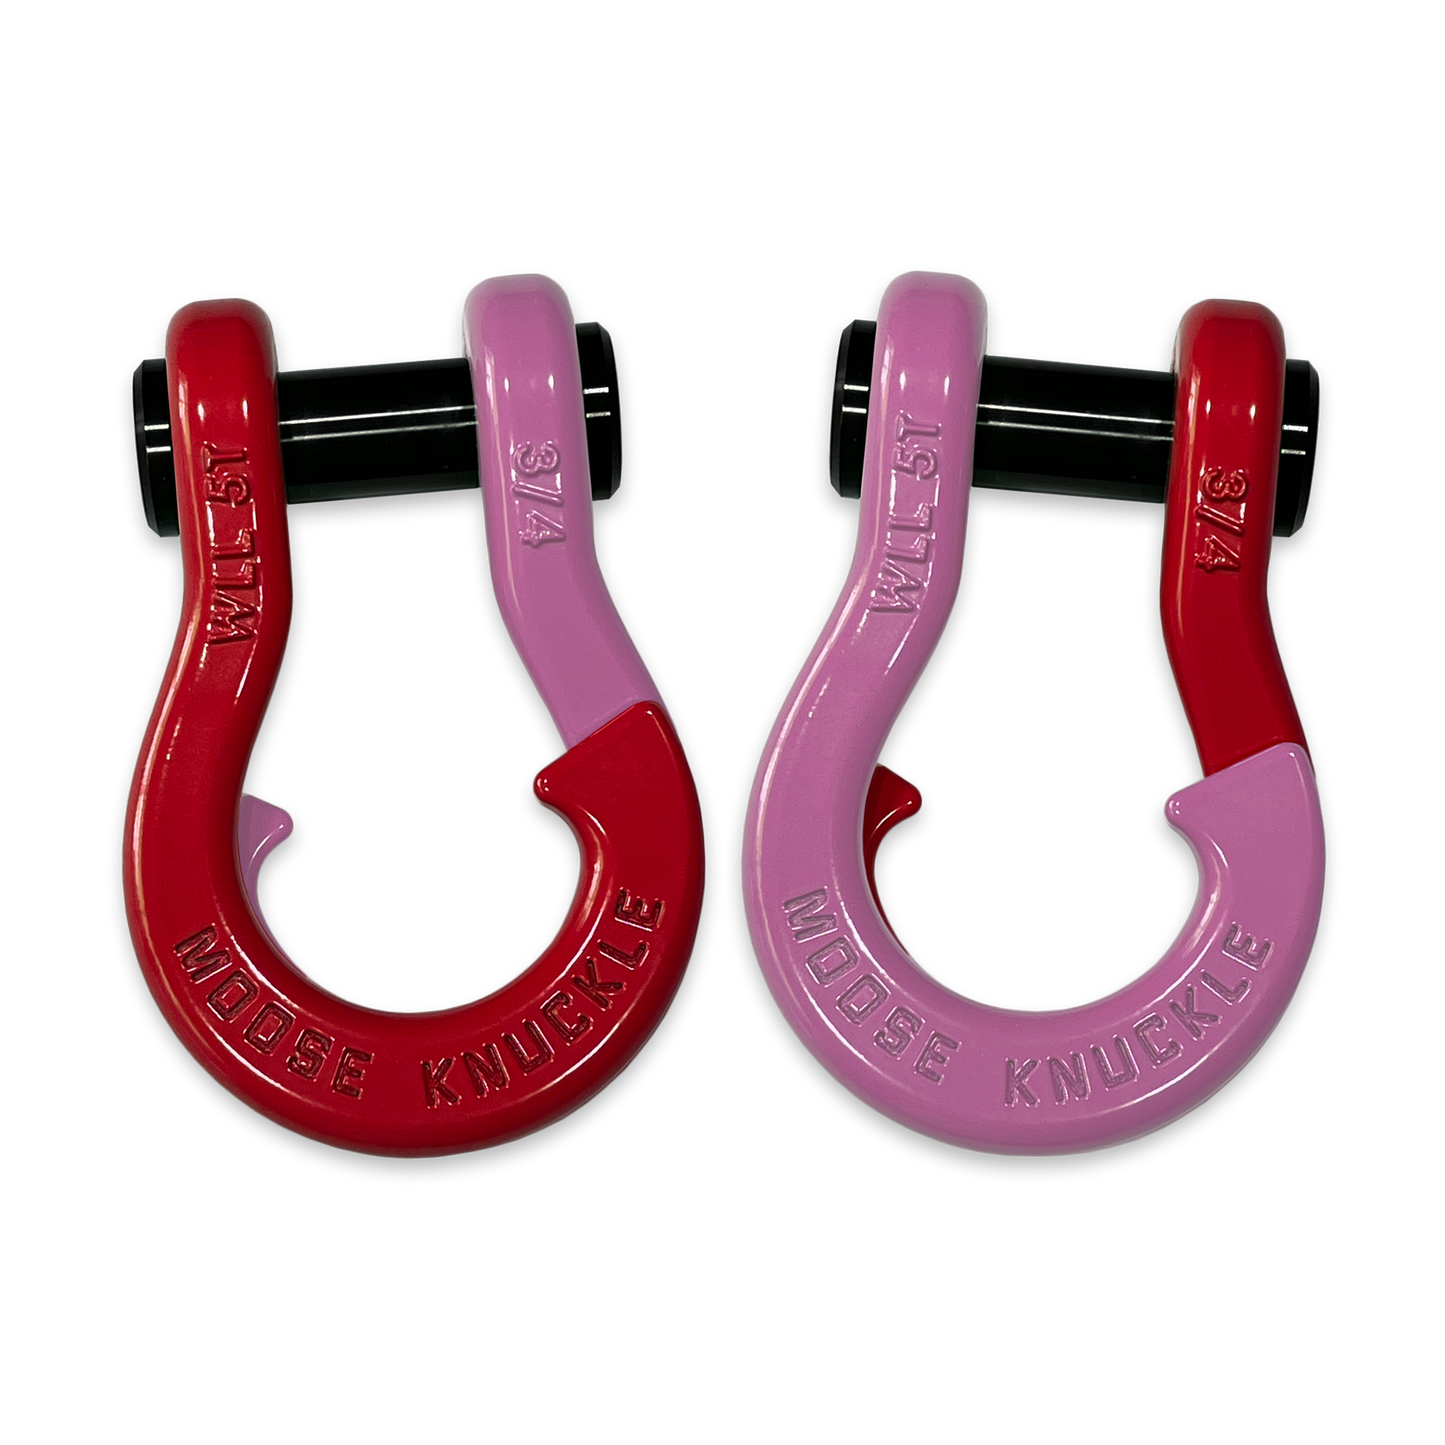 Moose Knuckle's Jowl Recovery Split Shackle 3/4 in Flame Red and Pretty Pink Combo